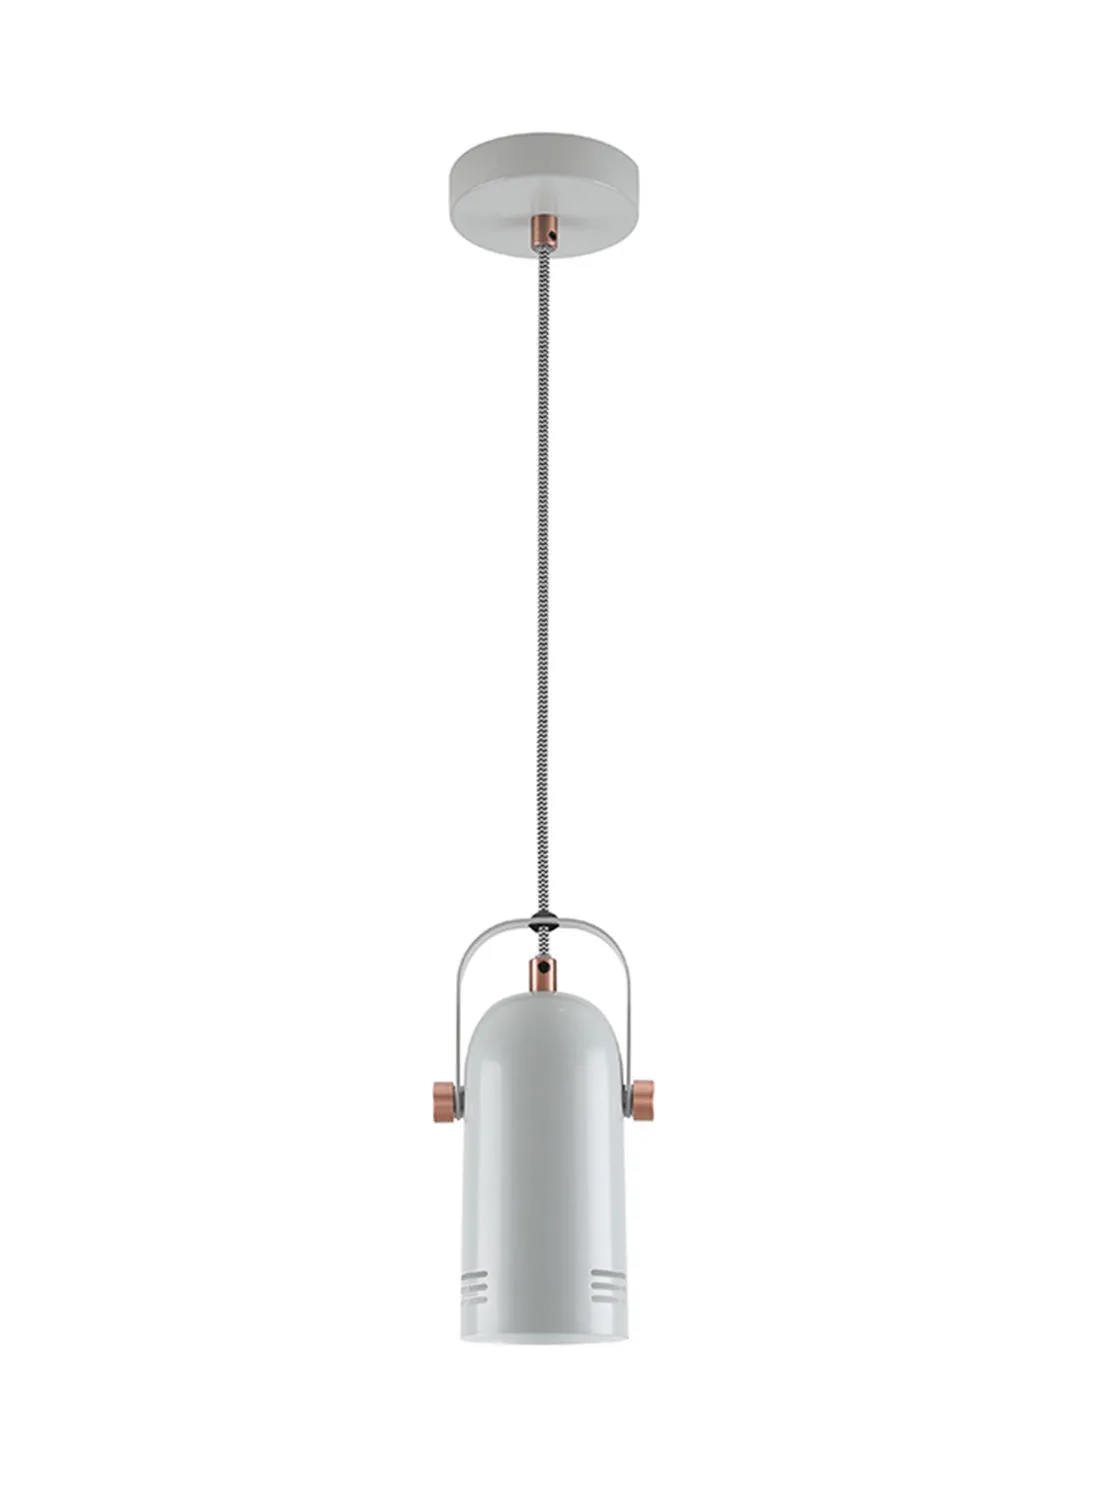 Switch Elegant Style Pendant Light Unique Luxury Quality Material for the Perfect Stylish Home Light Grey/Red Copper 8 x 8 x 172cm Light Grey/Red Copper 8 x 8 x 172cm